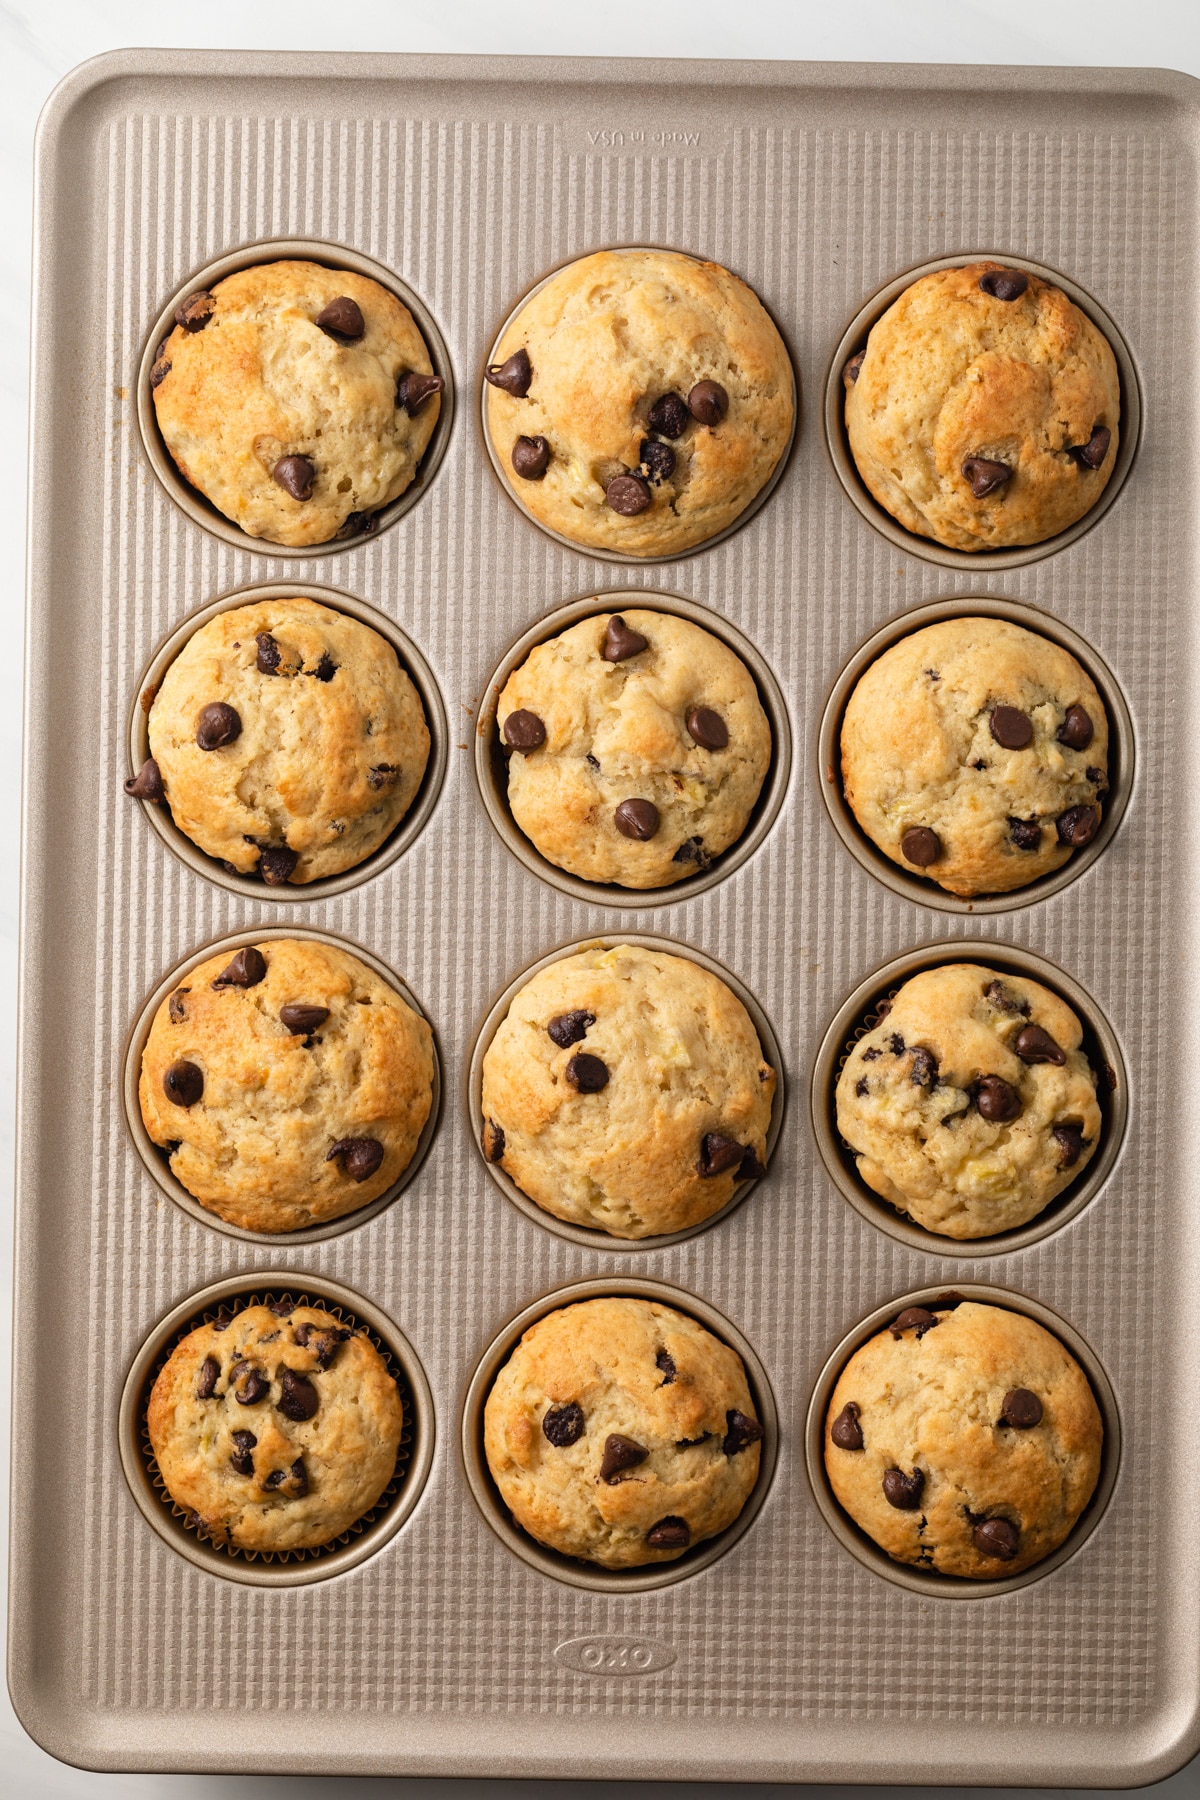 Baked banana chocolate chip muffins in muffin pan.